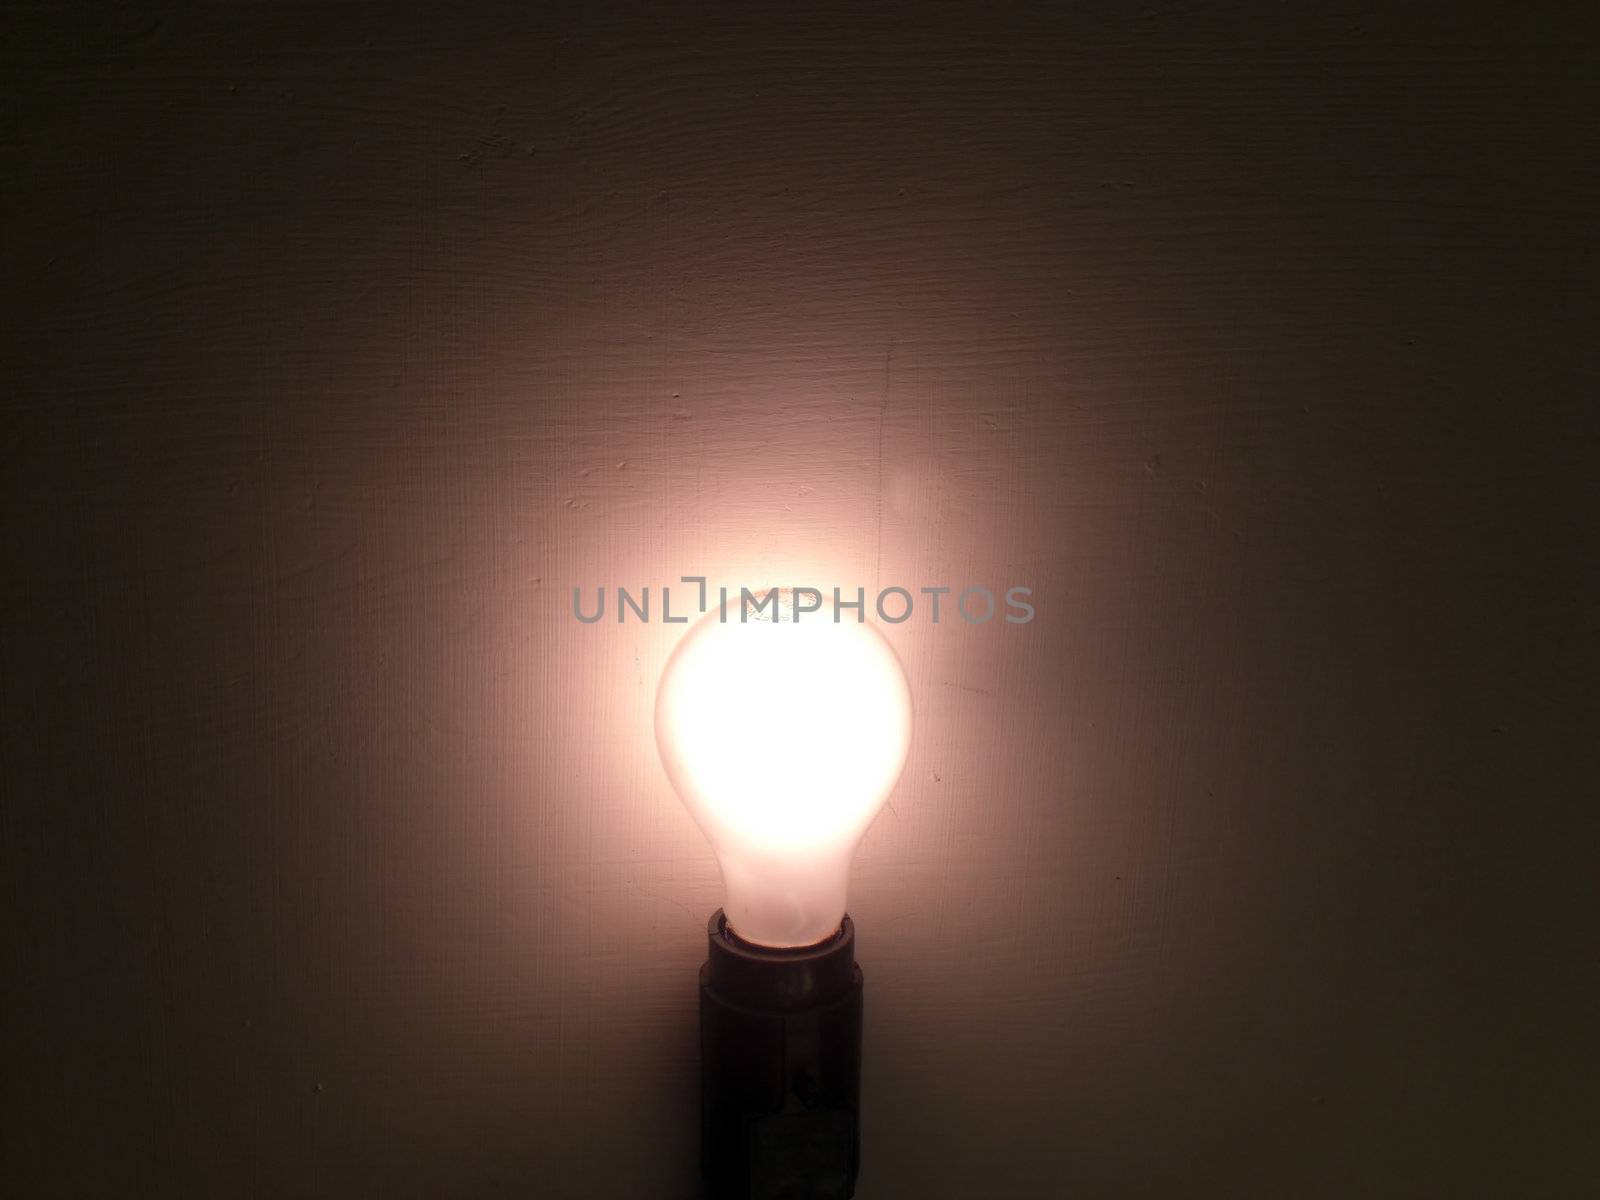 A lit bulb is surrounded by the darkness.